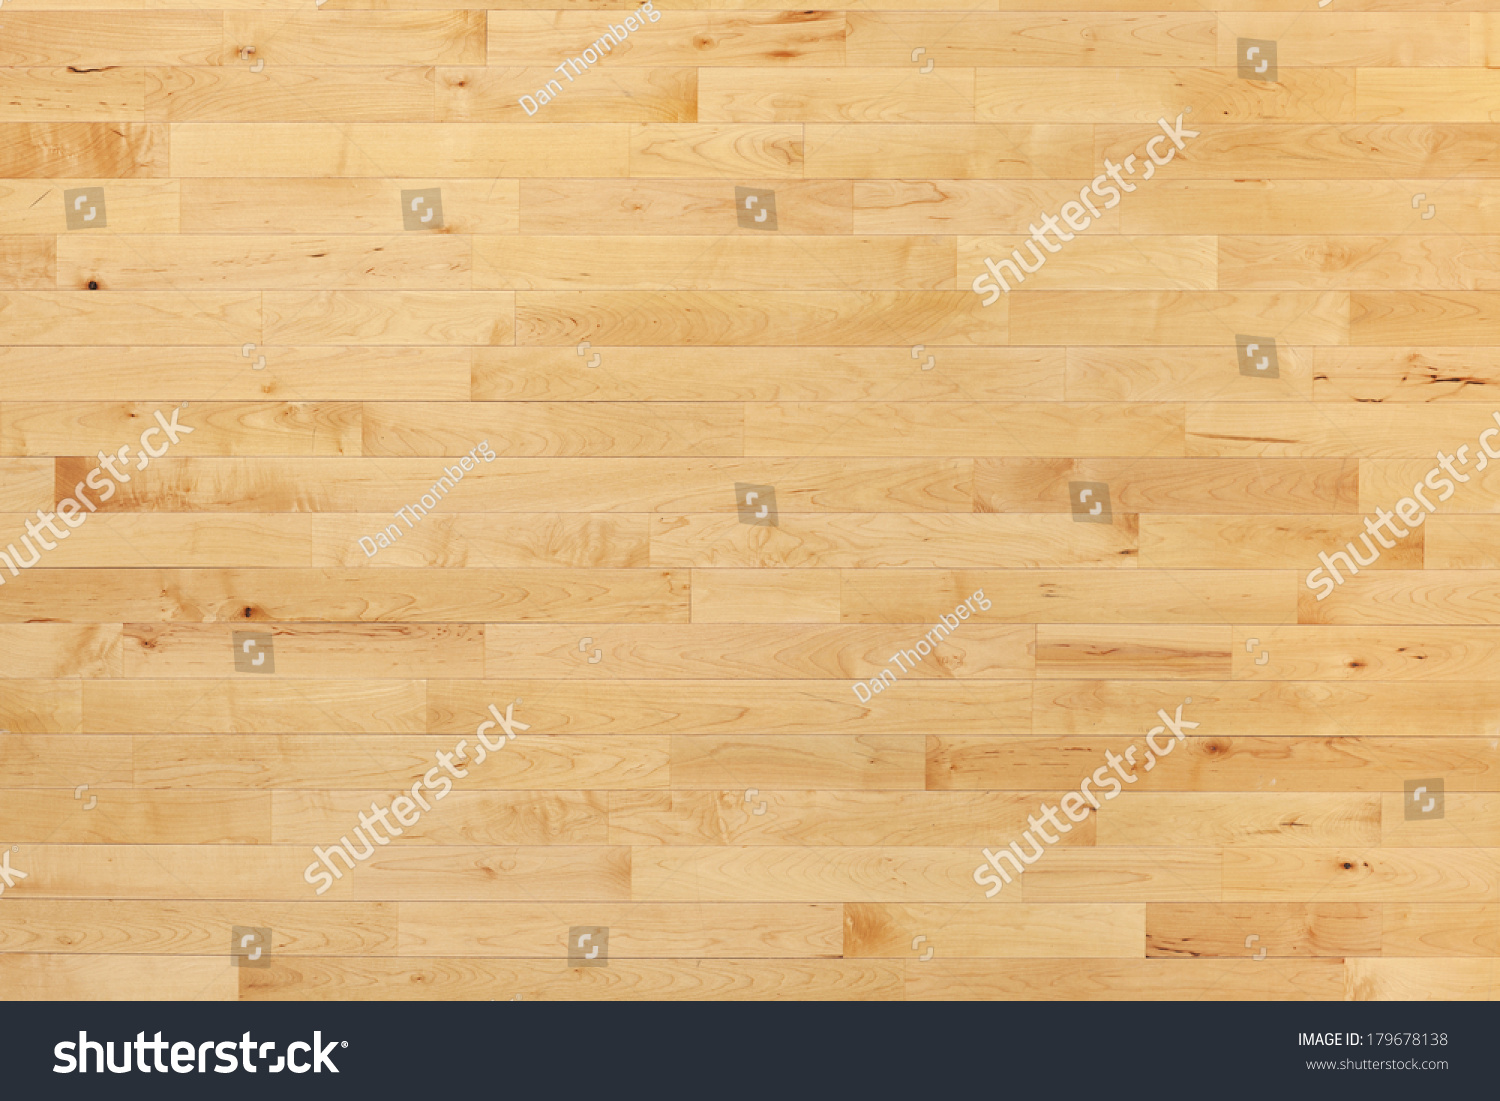 Hardwood maple basketball court floor viewed from above #179678138